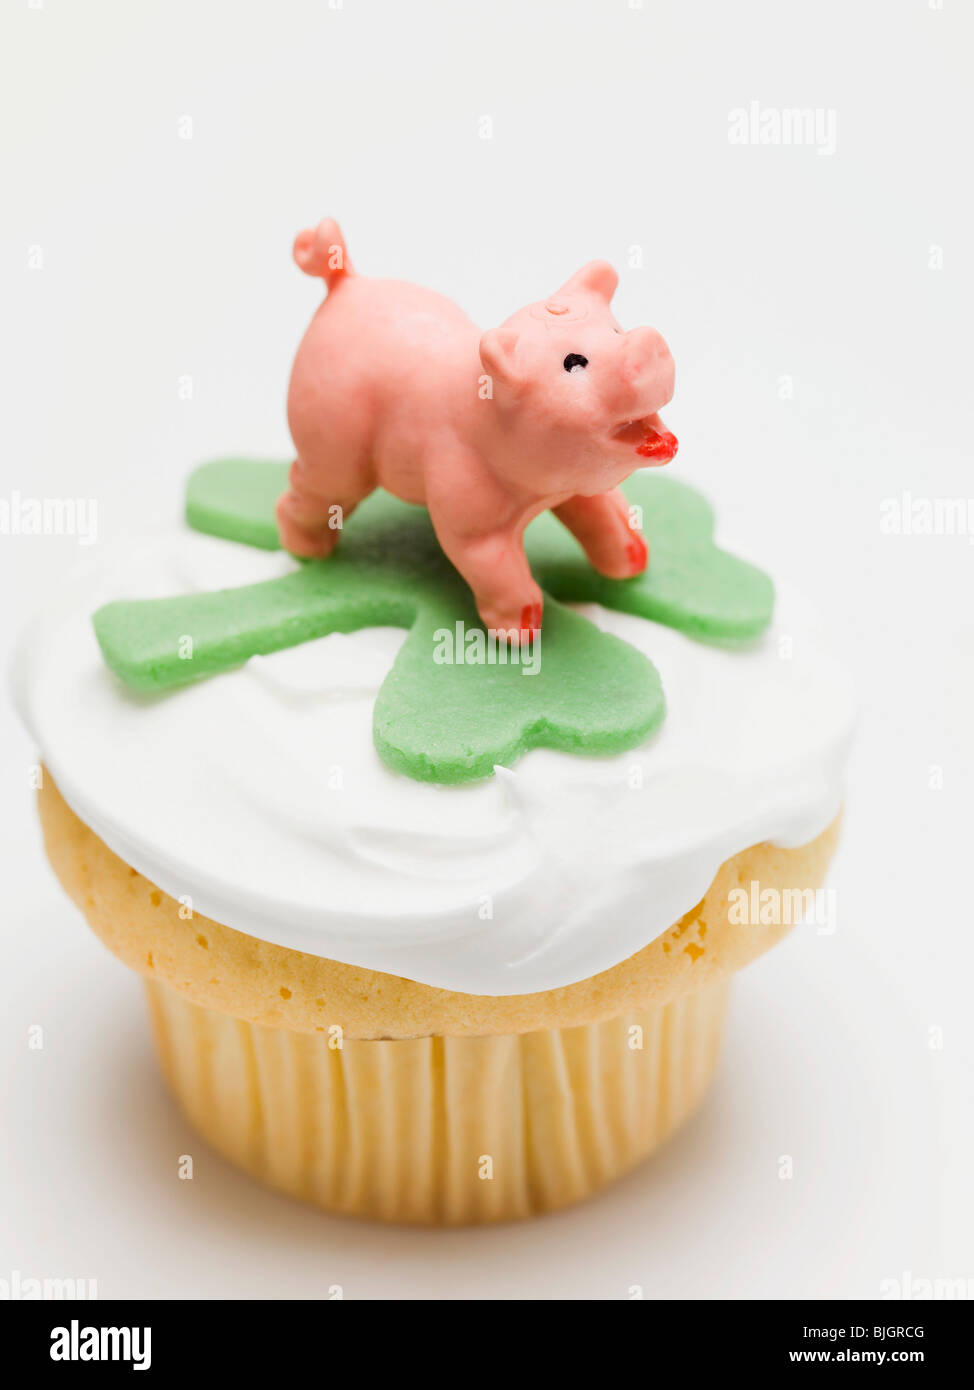 Cupcake decorated with lucky charms for New Year's Eve - Stock Photo